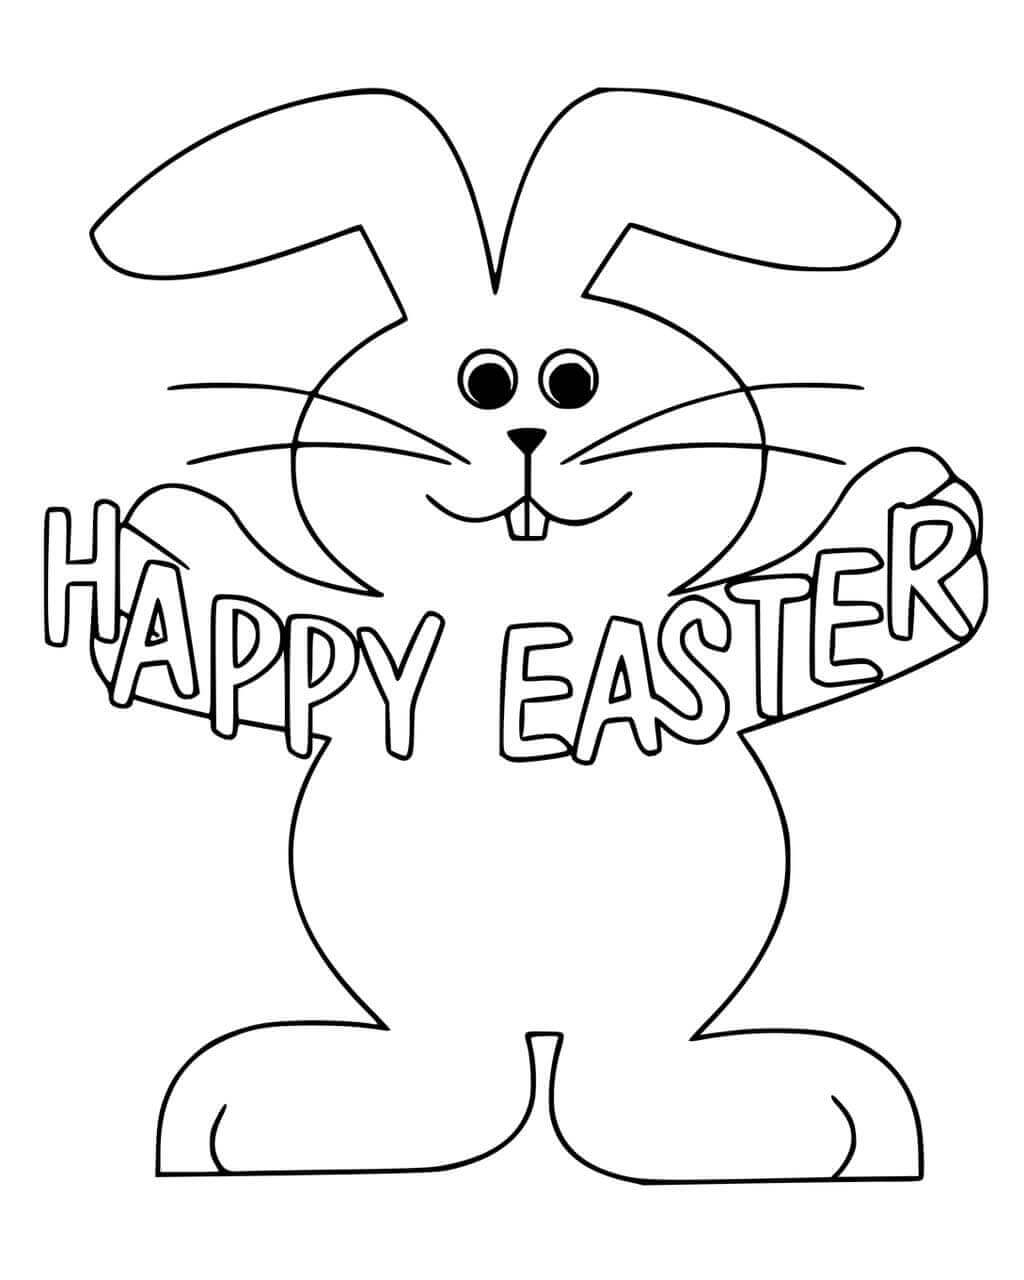 Happy Easter Bunny Coloring Page for Kids